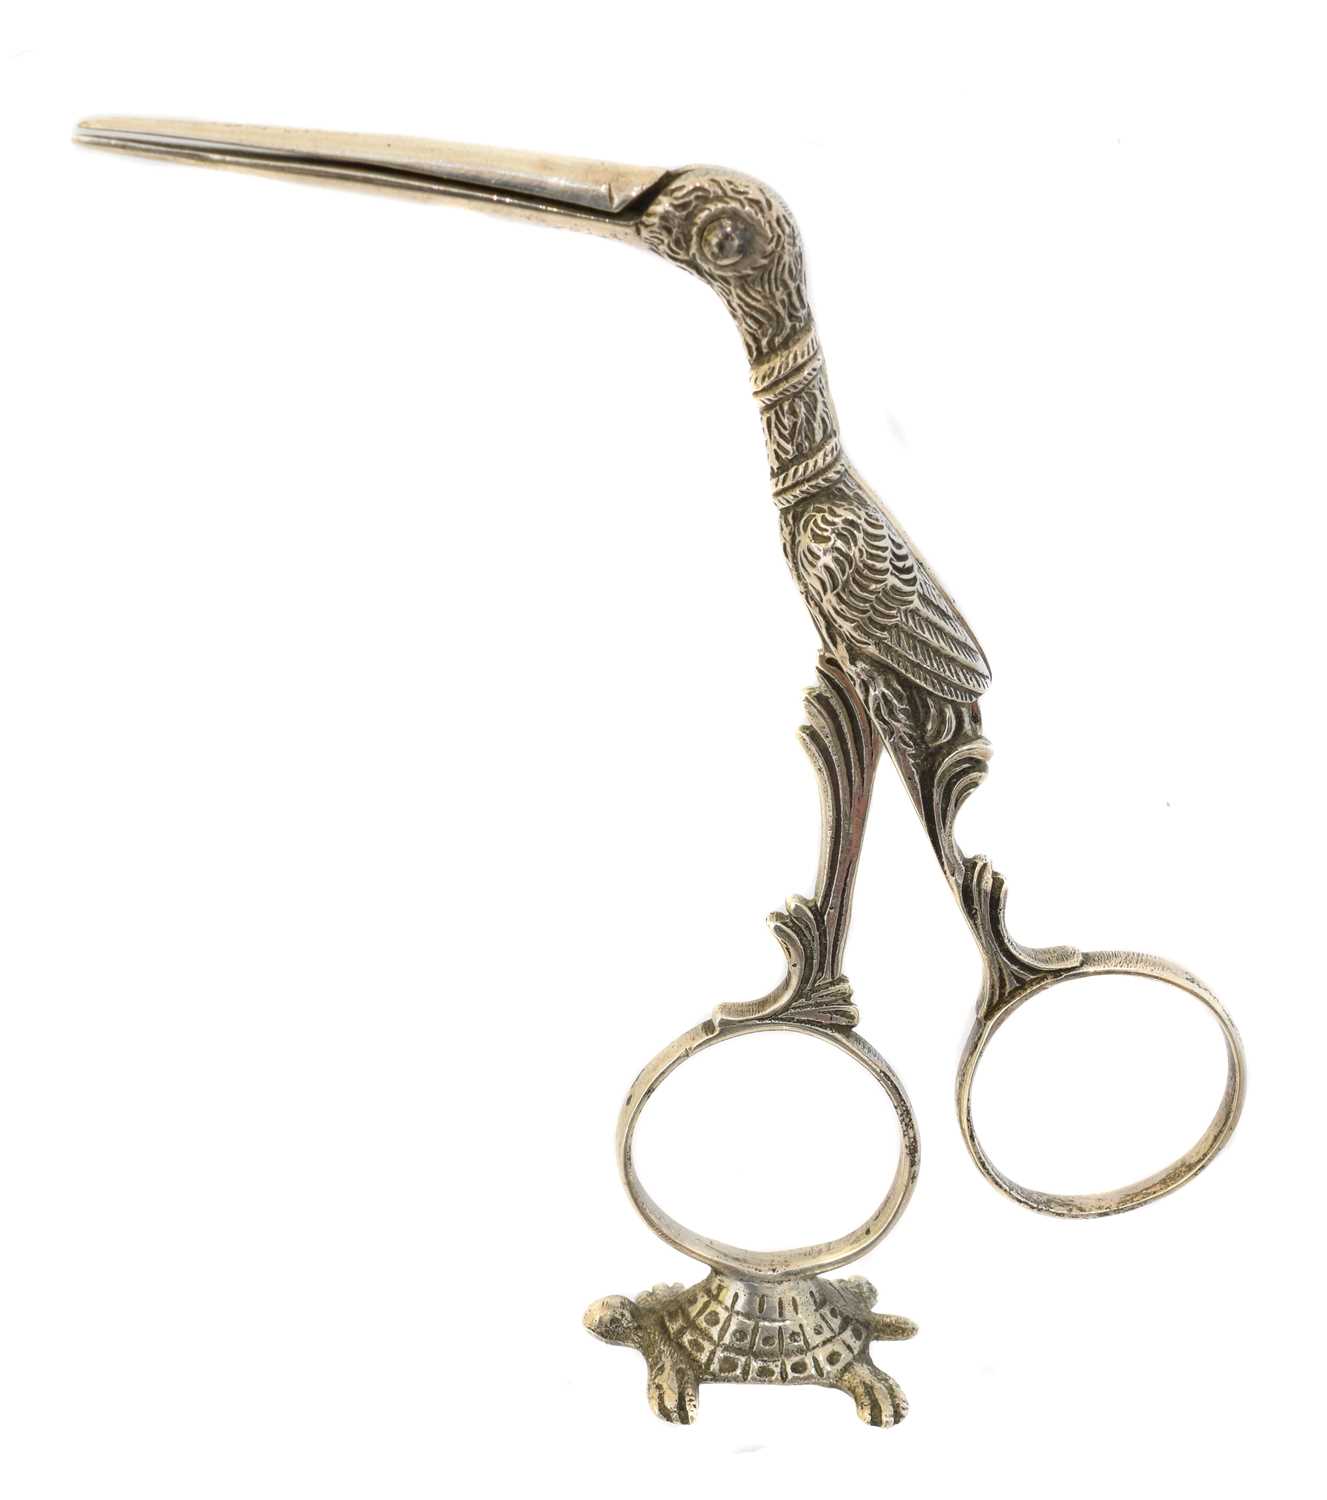 Lot 159 - A pair of early 20th century German Hanau silver embroidery scissors